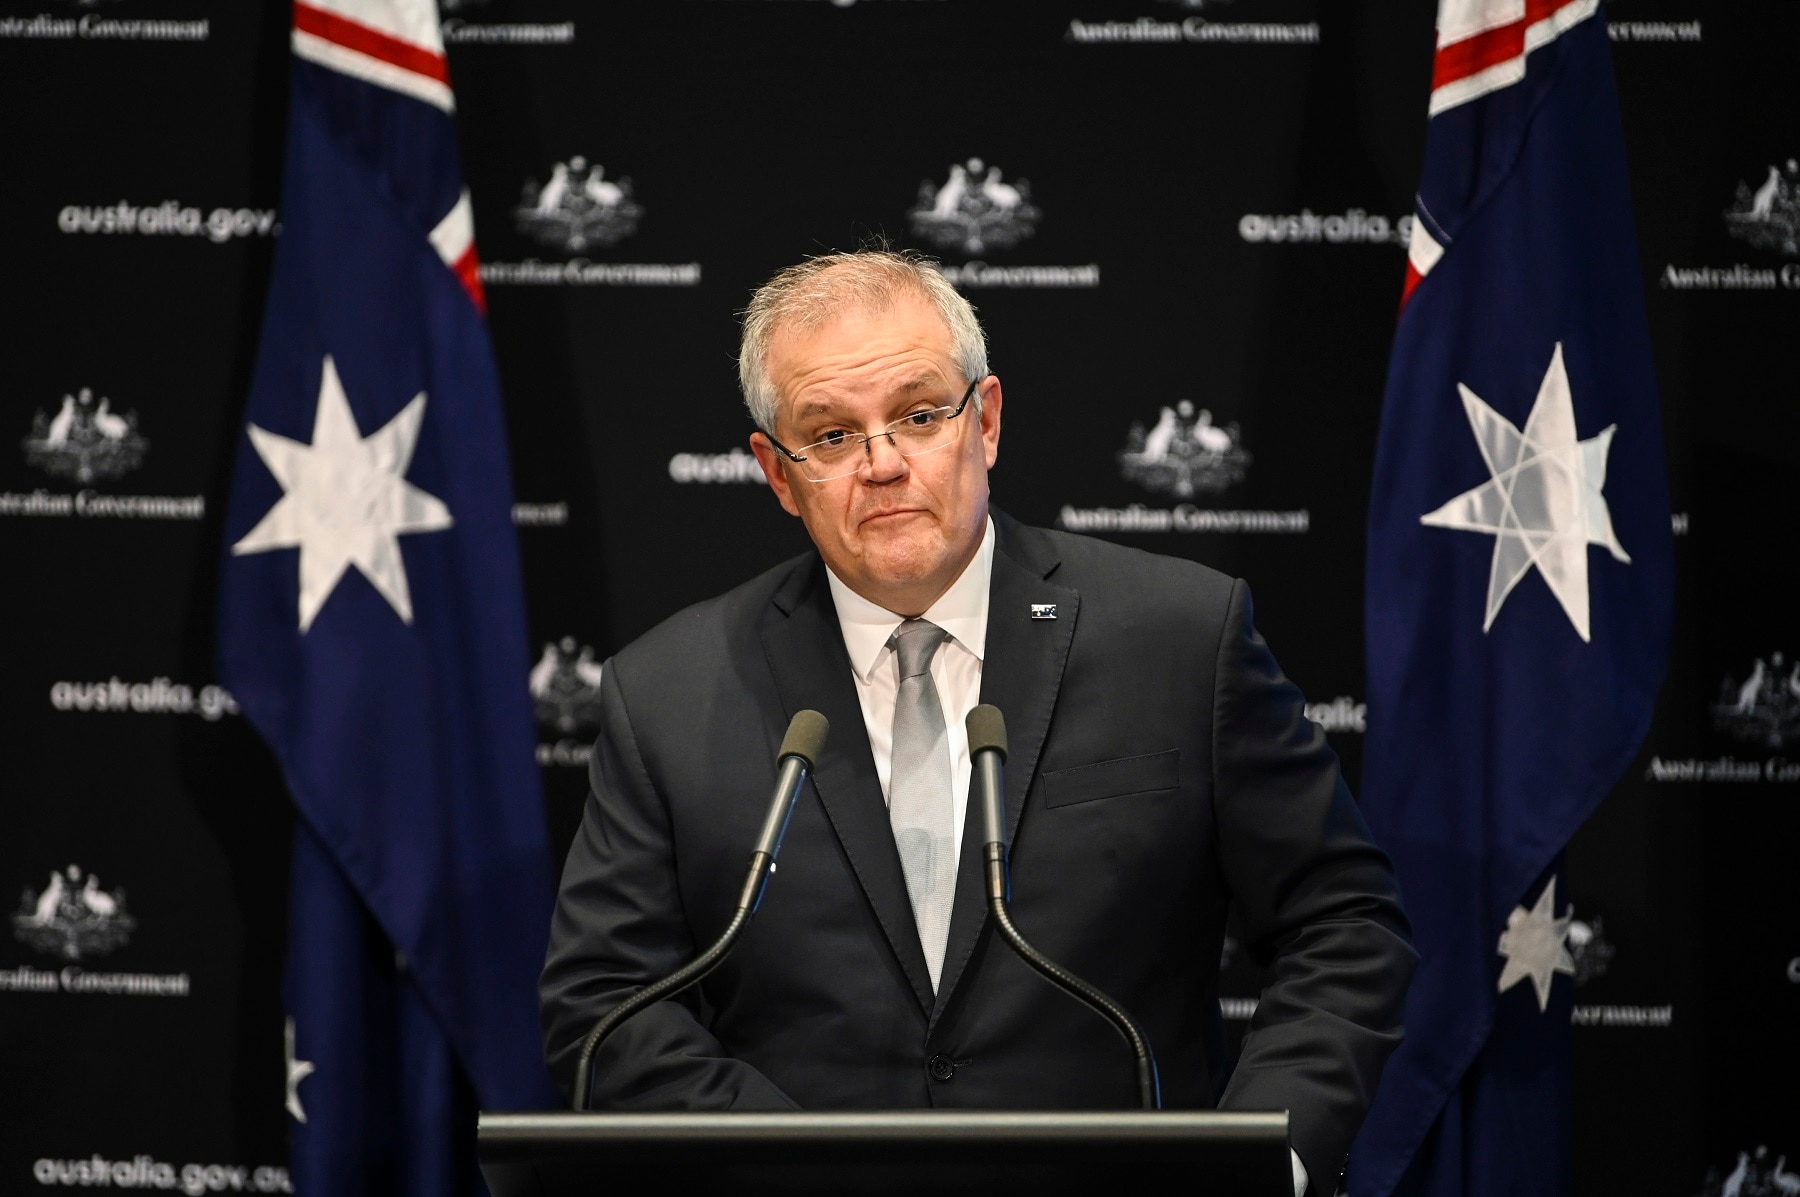 Australian Prime Minister Scott Morrison speaks to the media during a press conference at Parliament House in Canberra, Friday, May 1, 2020. (AAP Image/Lukas Coch) NO ARCHIVING